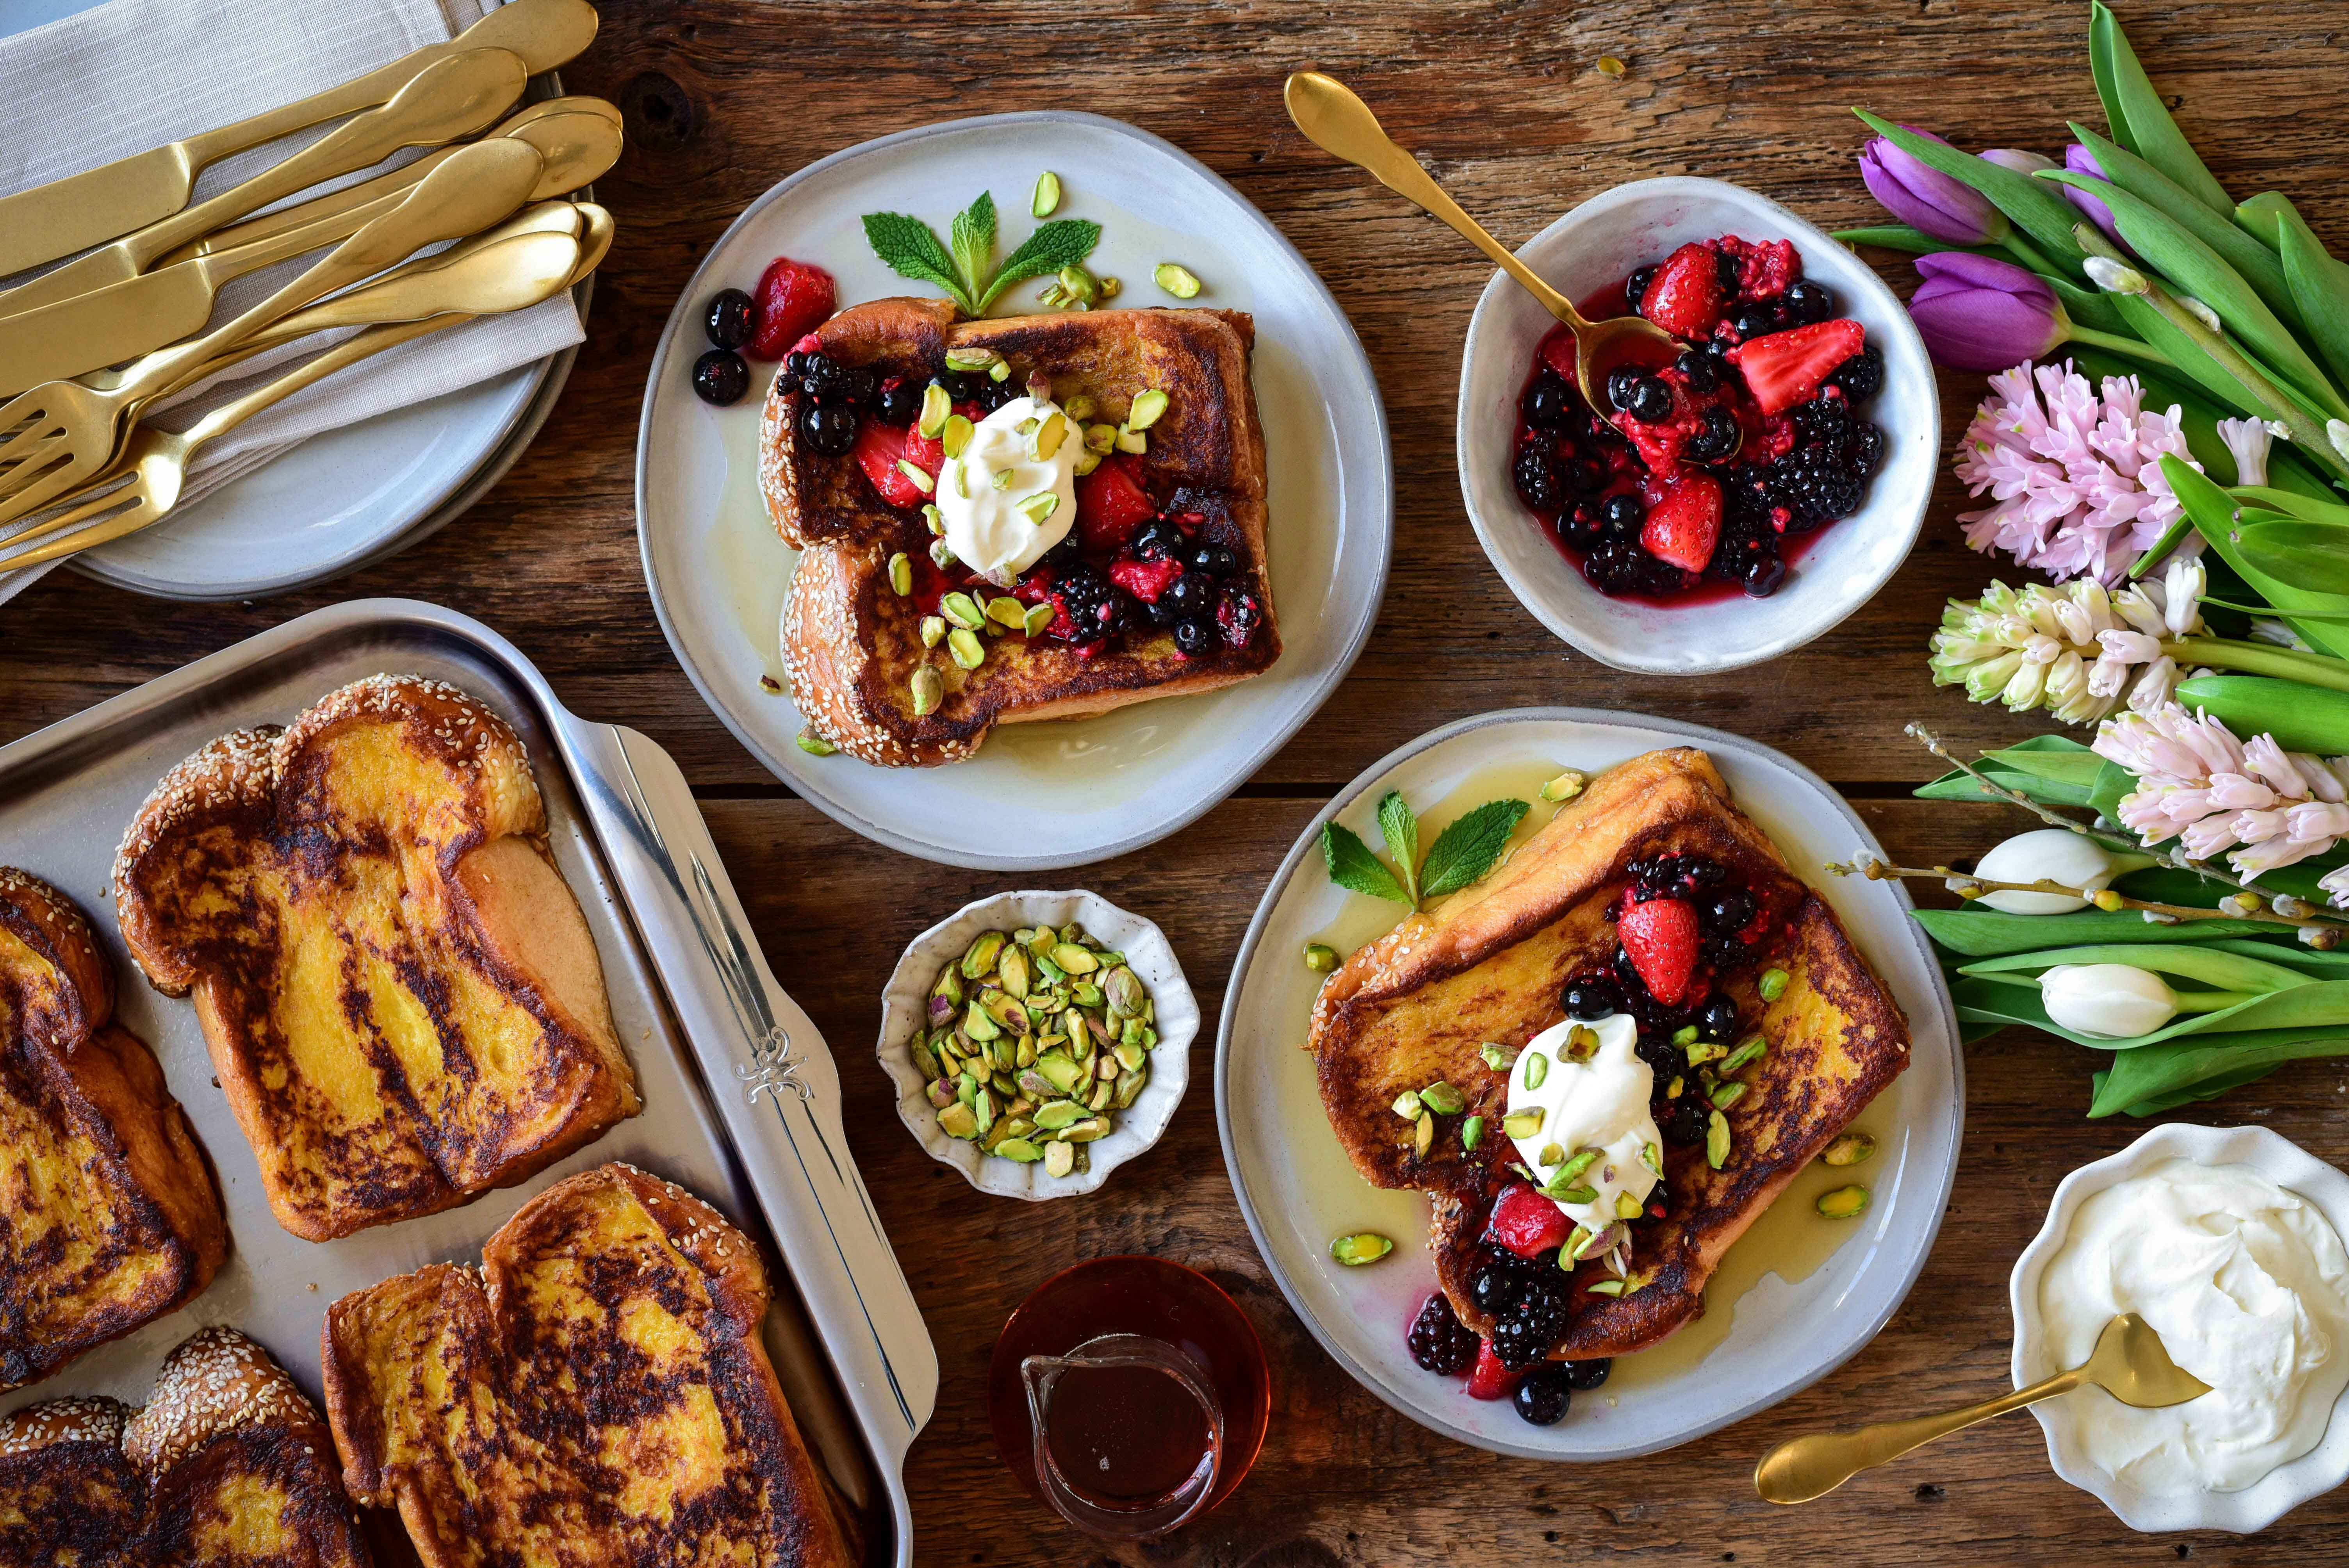 Image of Challah French Toast with Mascarpone and Berries